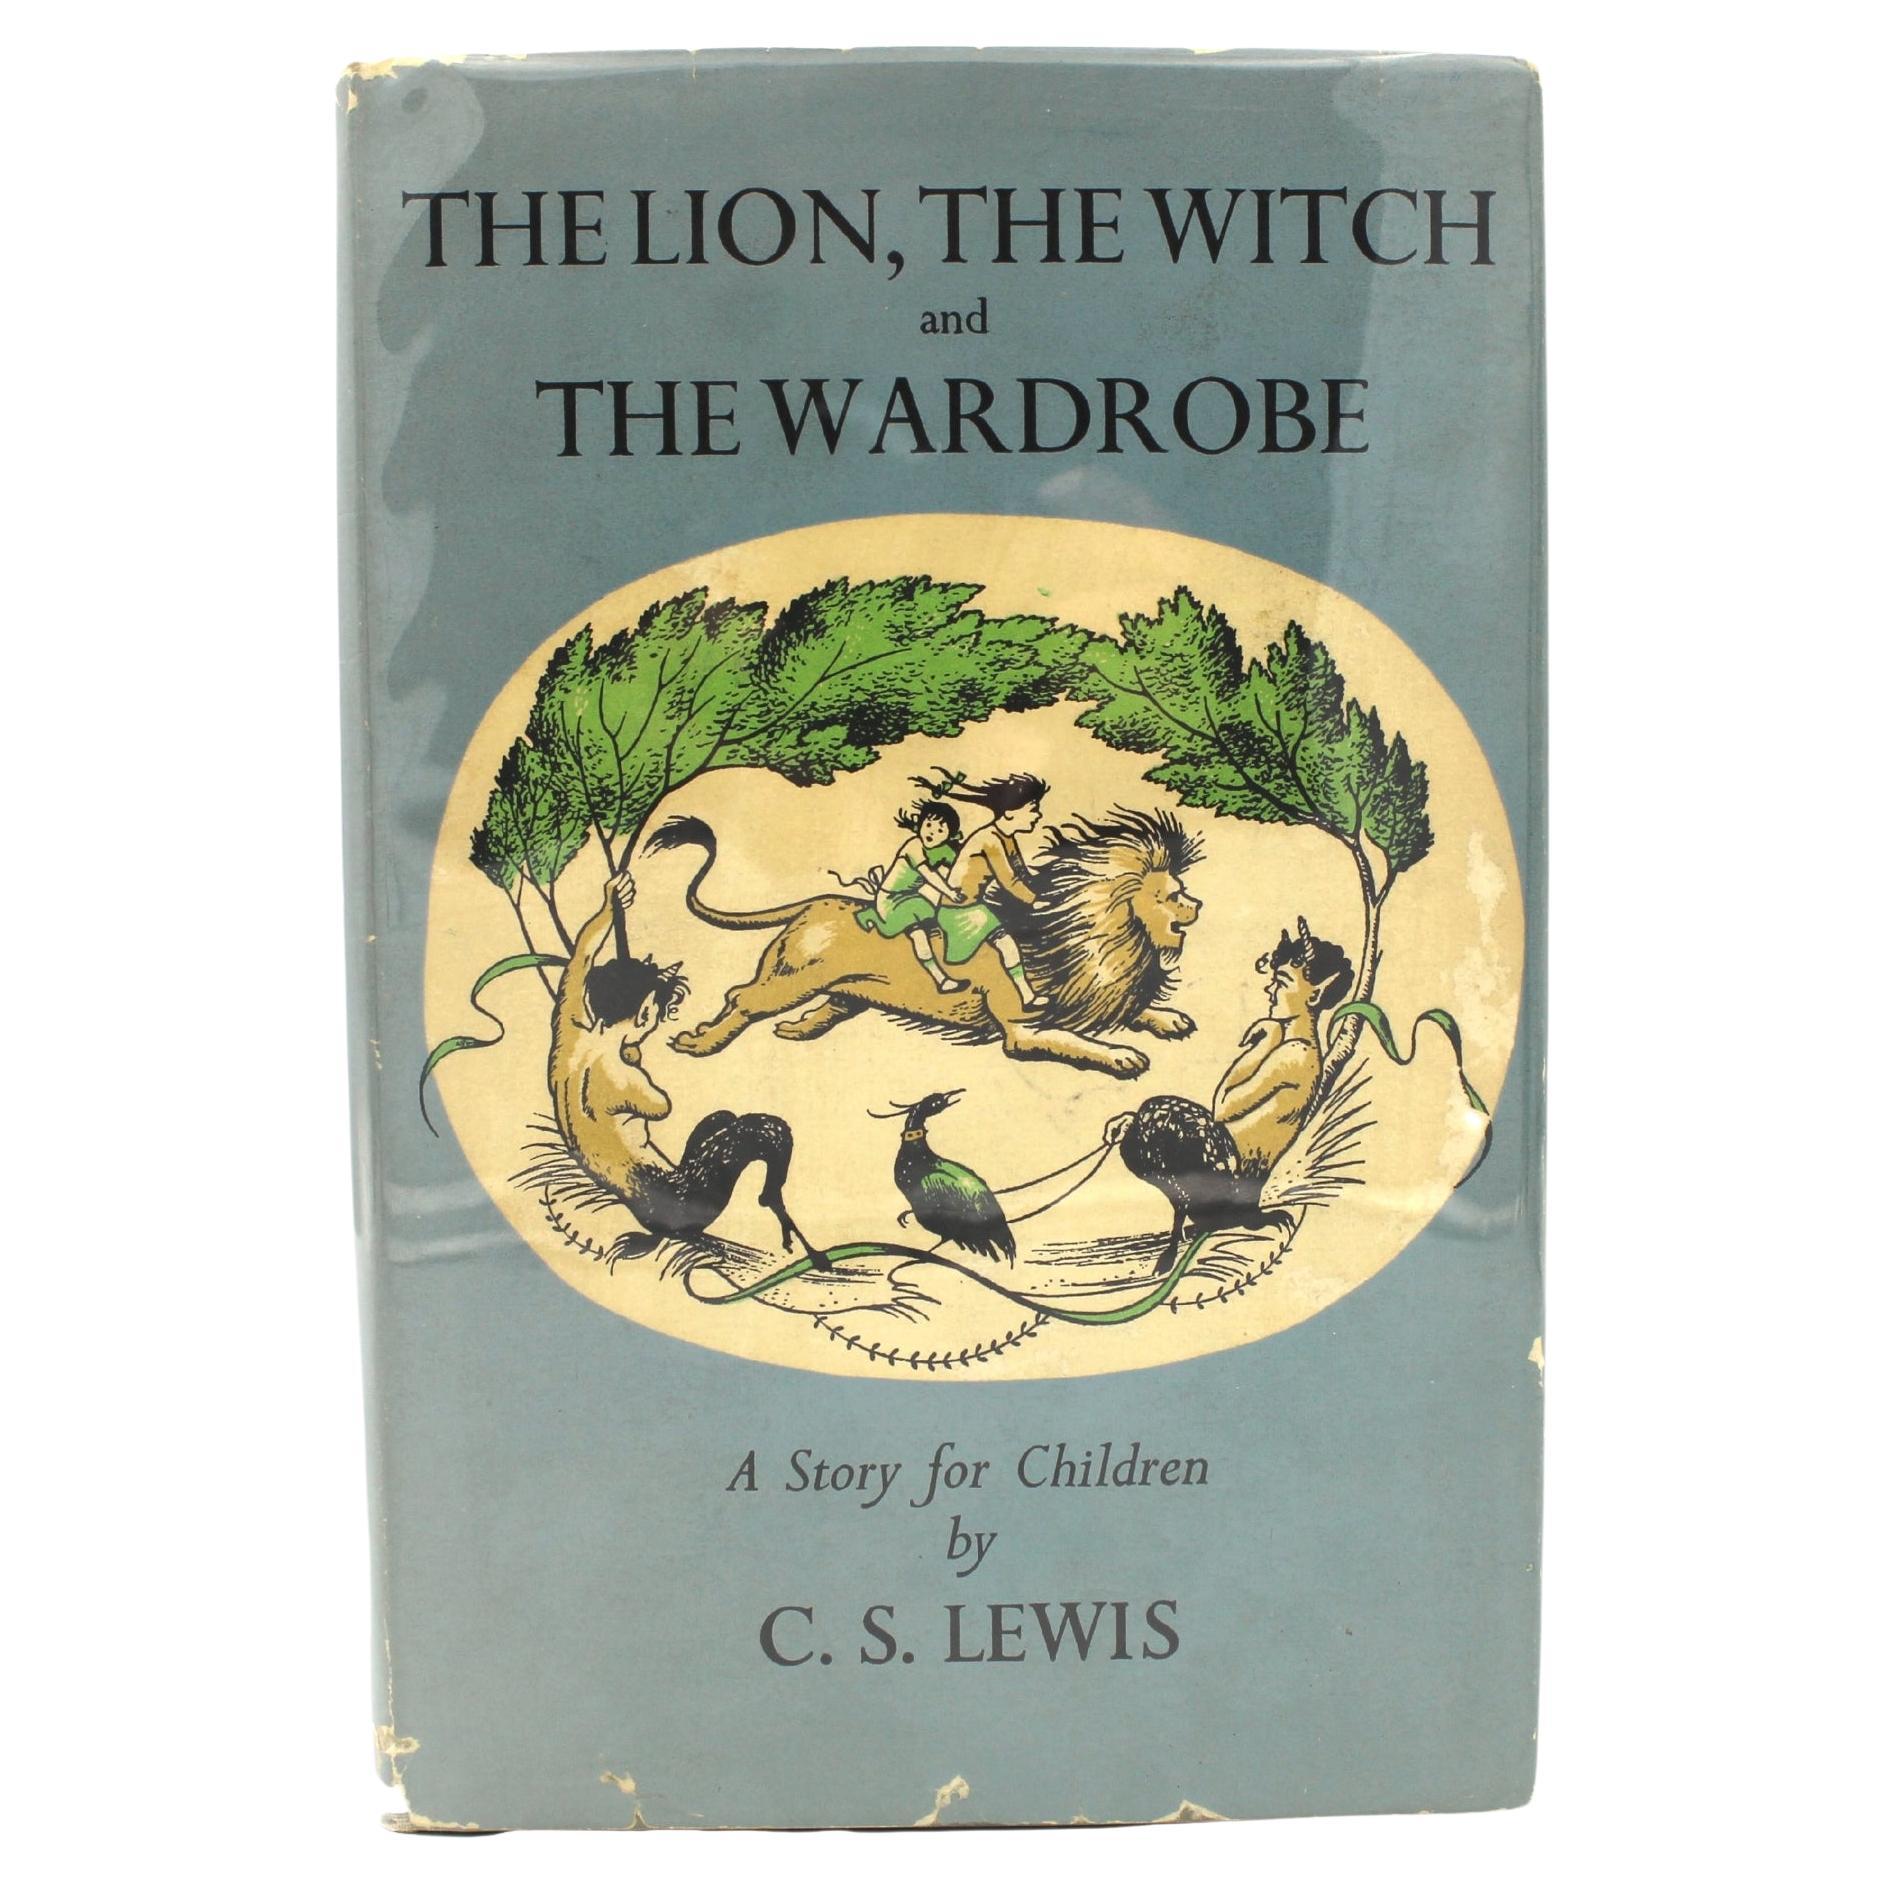 The Lion, The Witch, and The Wardrobe by C. S. Lewis, First US Edition in DJ